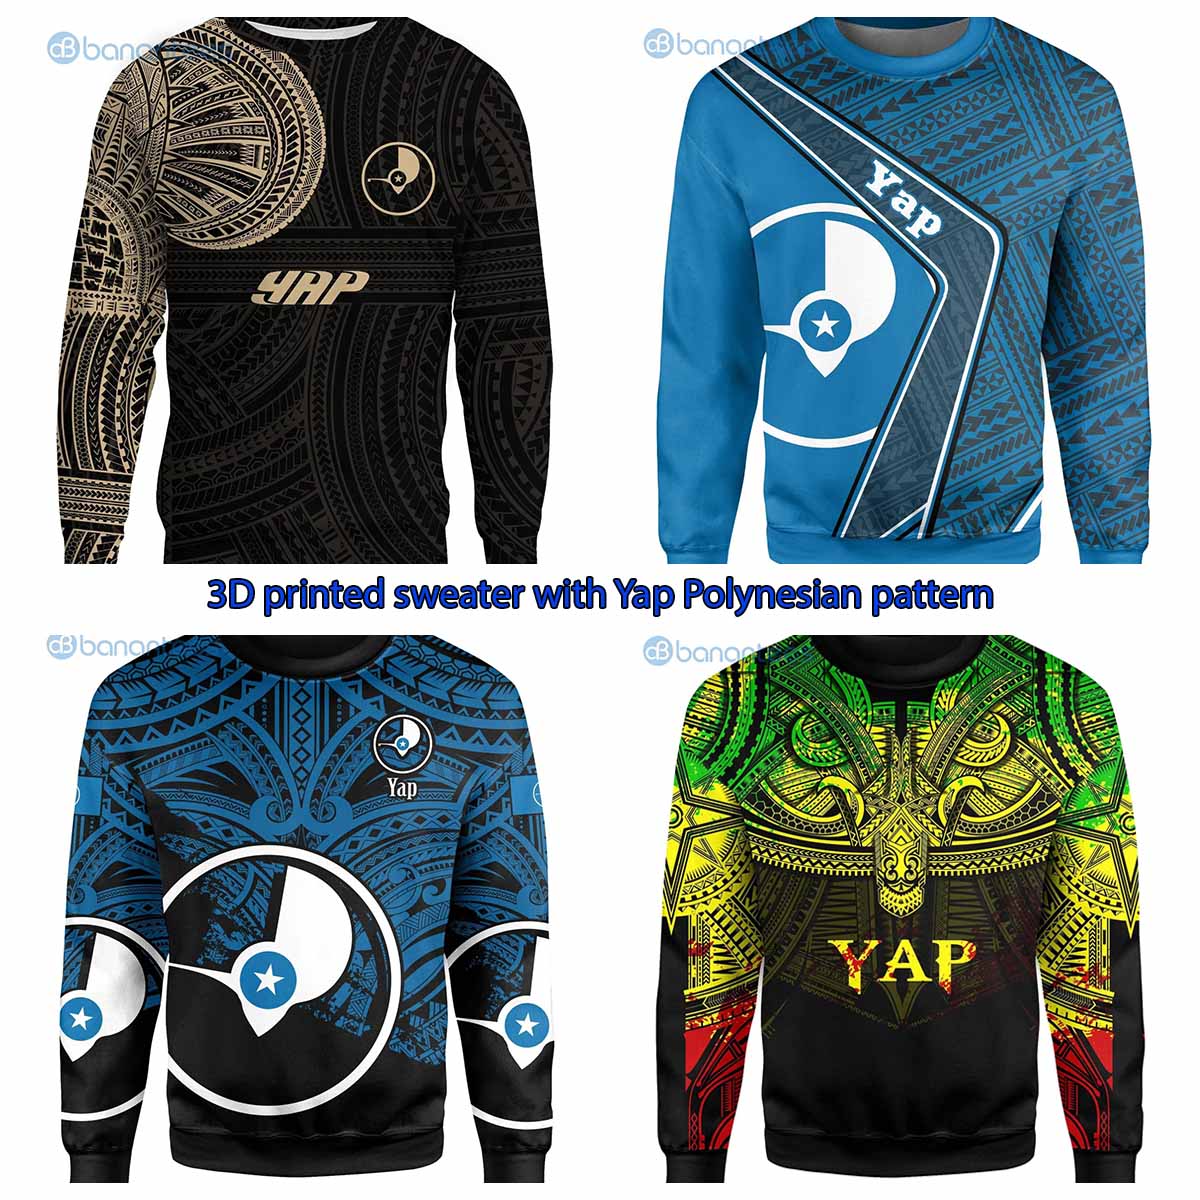 3D printed sweater with Yap Polynesian pattern